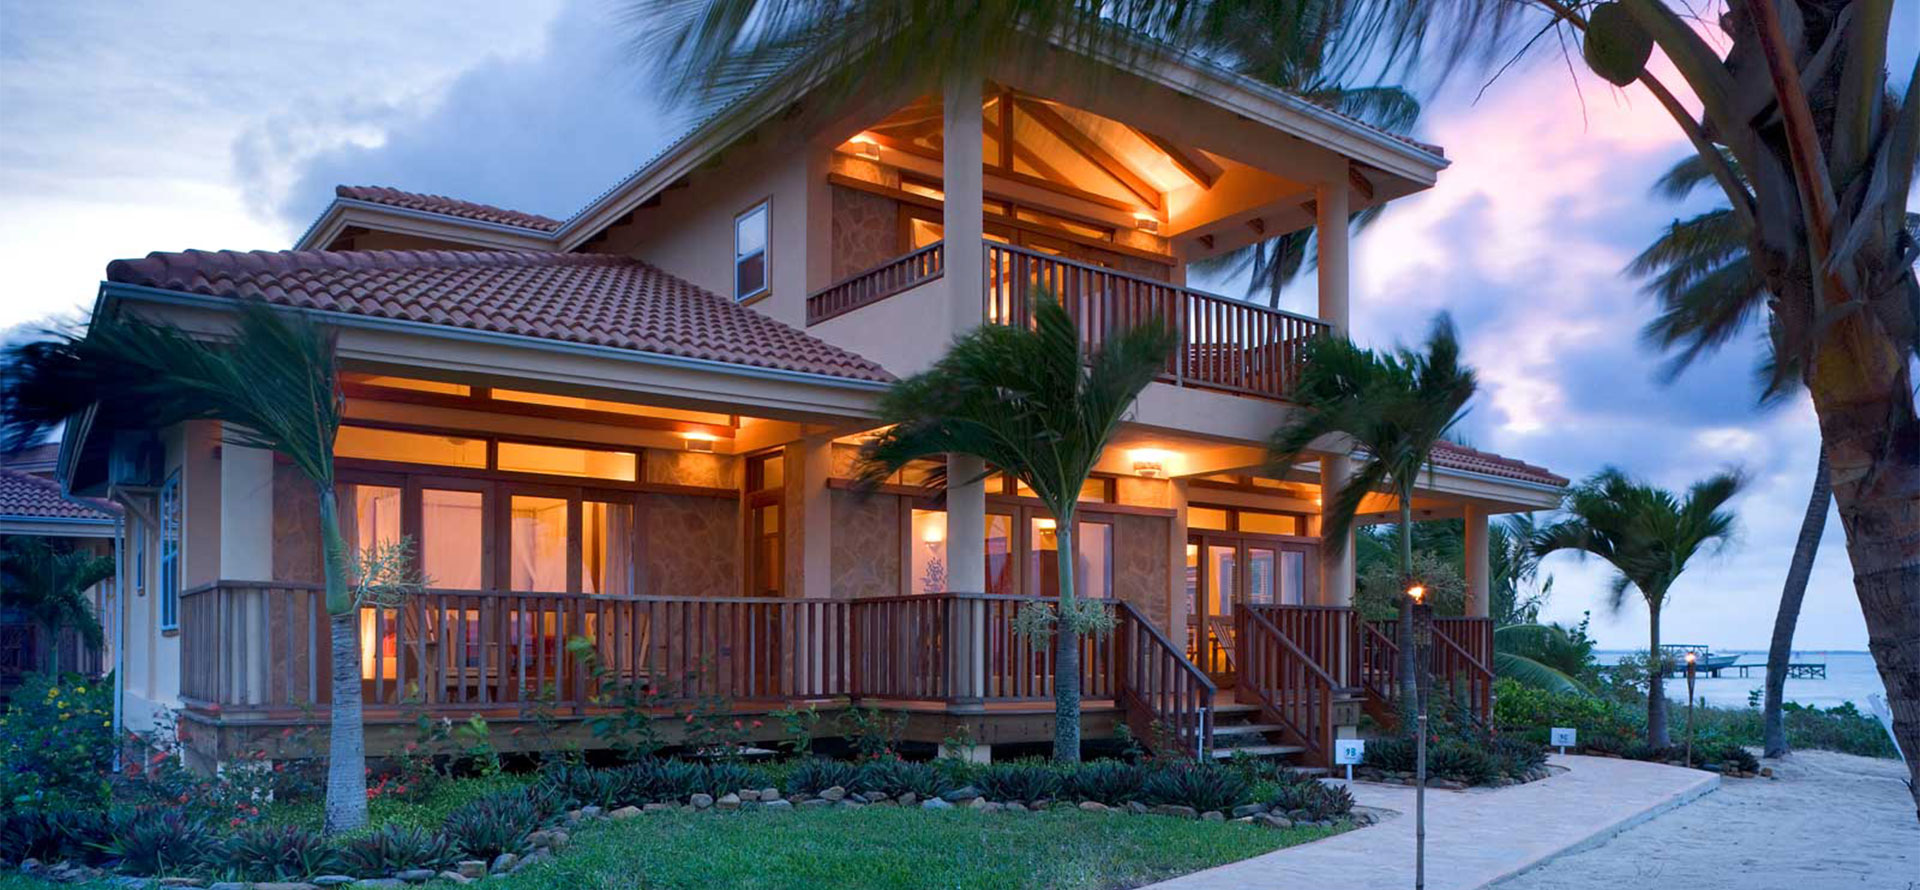 Belize all-inclusive adults only resort at night.